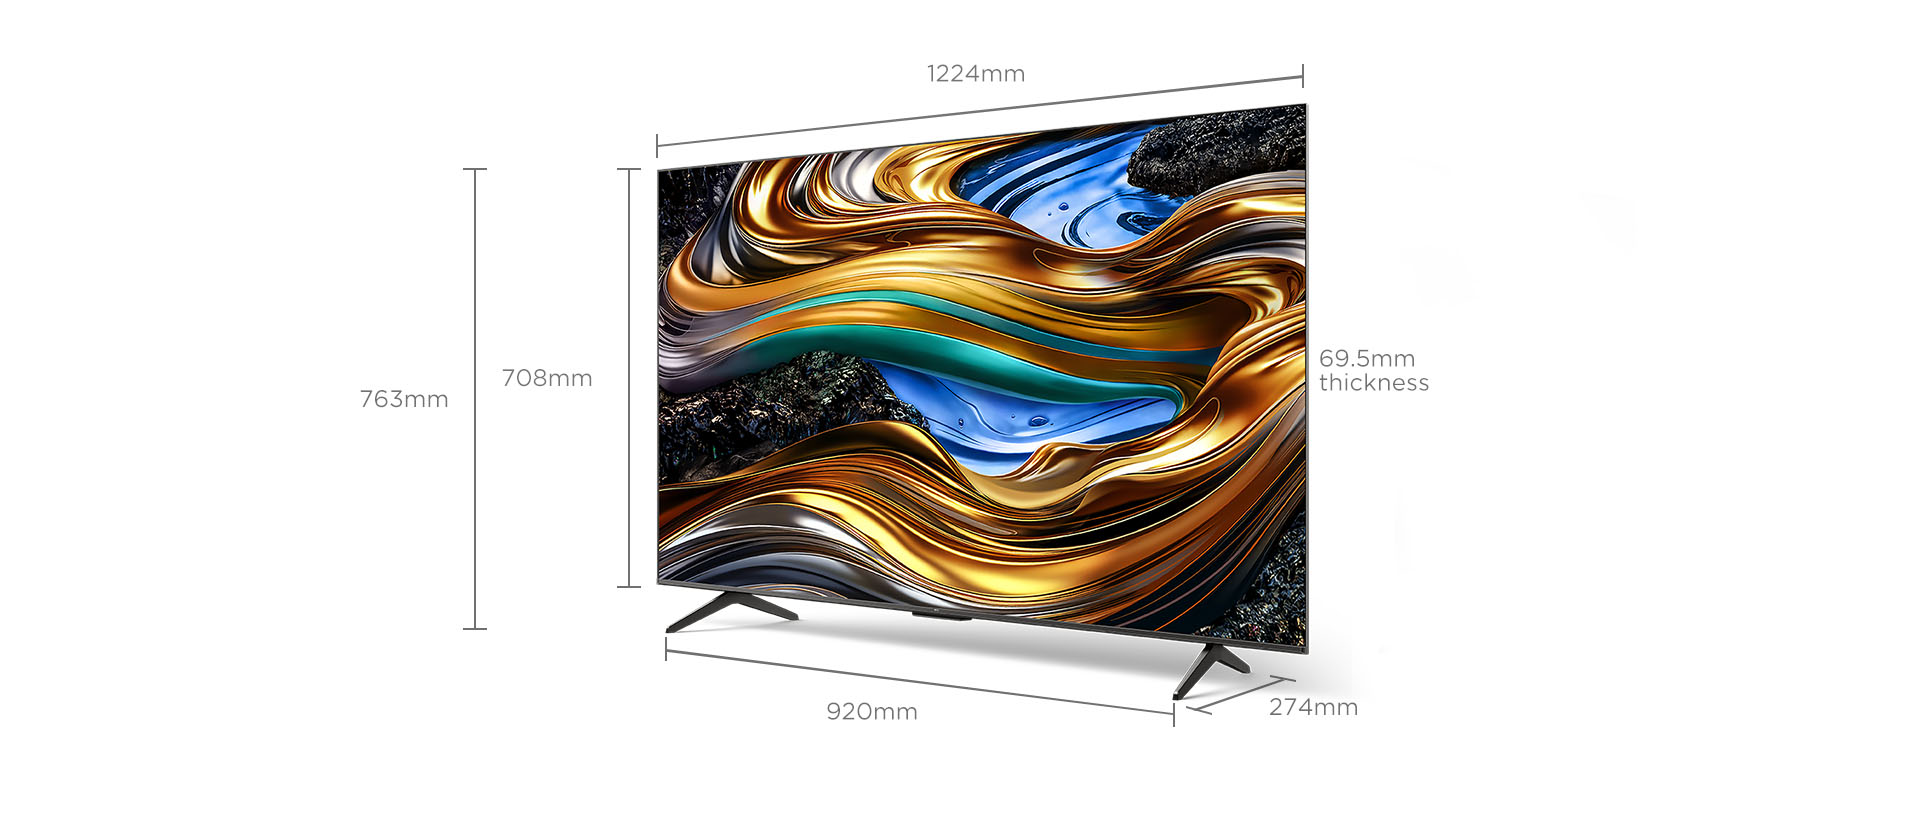 60 inch TCL P755 Smart TV